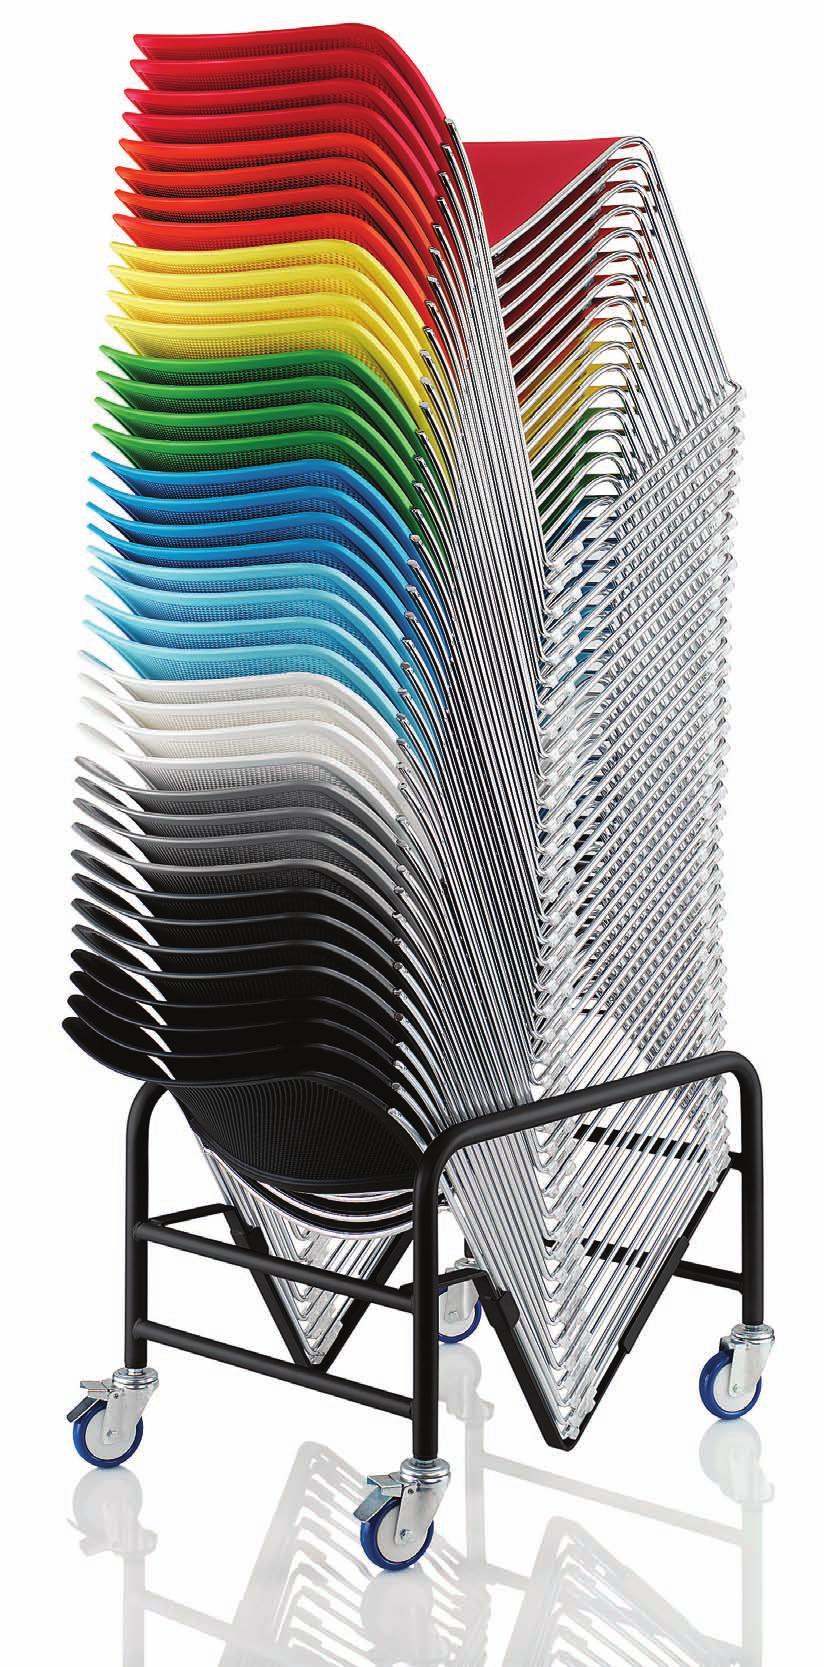 finishes standard colours available on the plastic chair White Light Grey Dark Grey Black Light Blue Dark Blue Green Yellow Orange Red standard finishes available on the